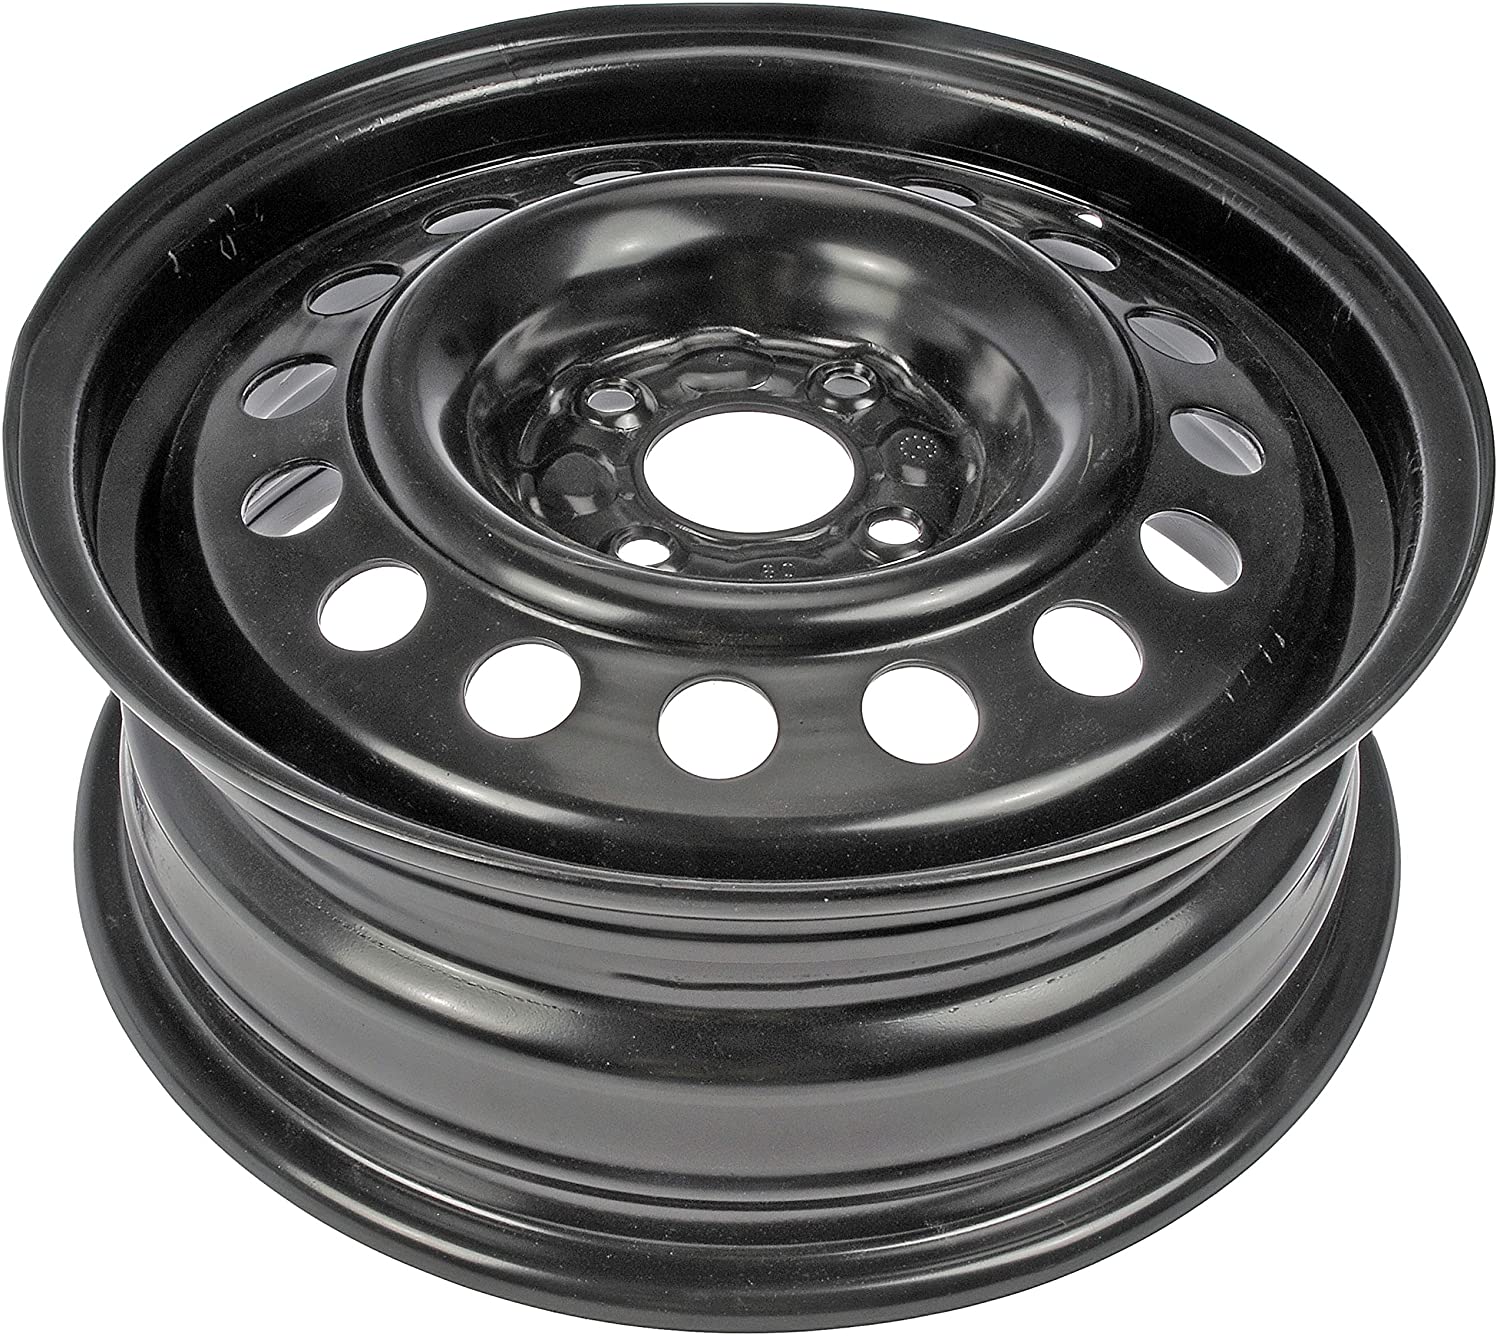 Dorman Black Wheel with Painted Finish (15 x 5.5 inches /4 x 3 inches, 45 mm Offset)